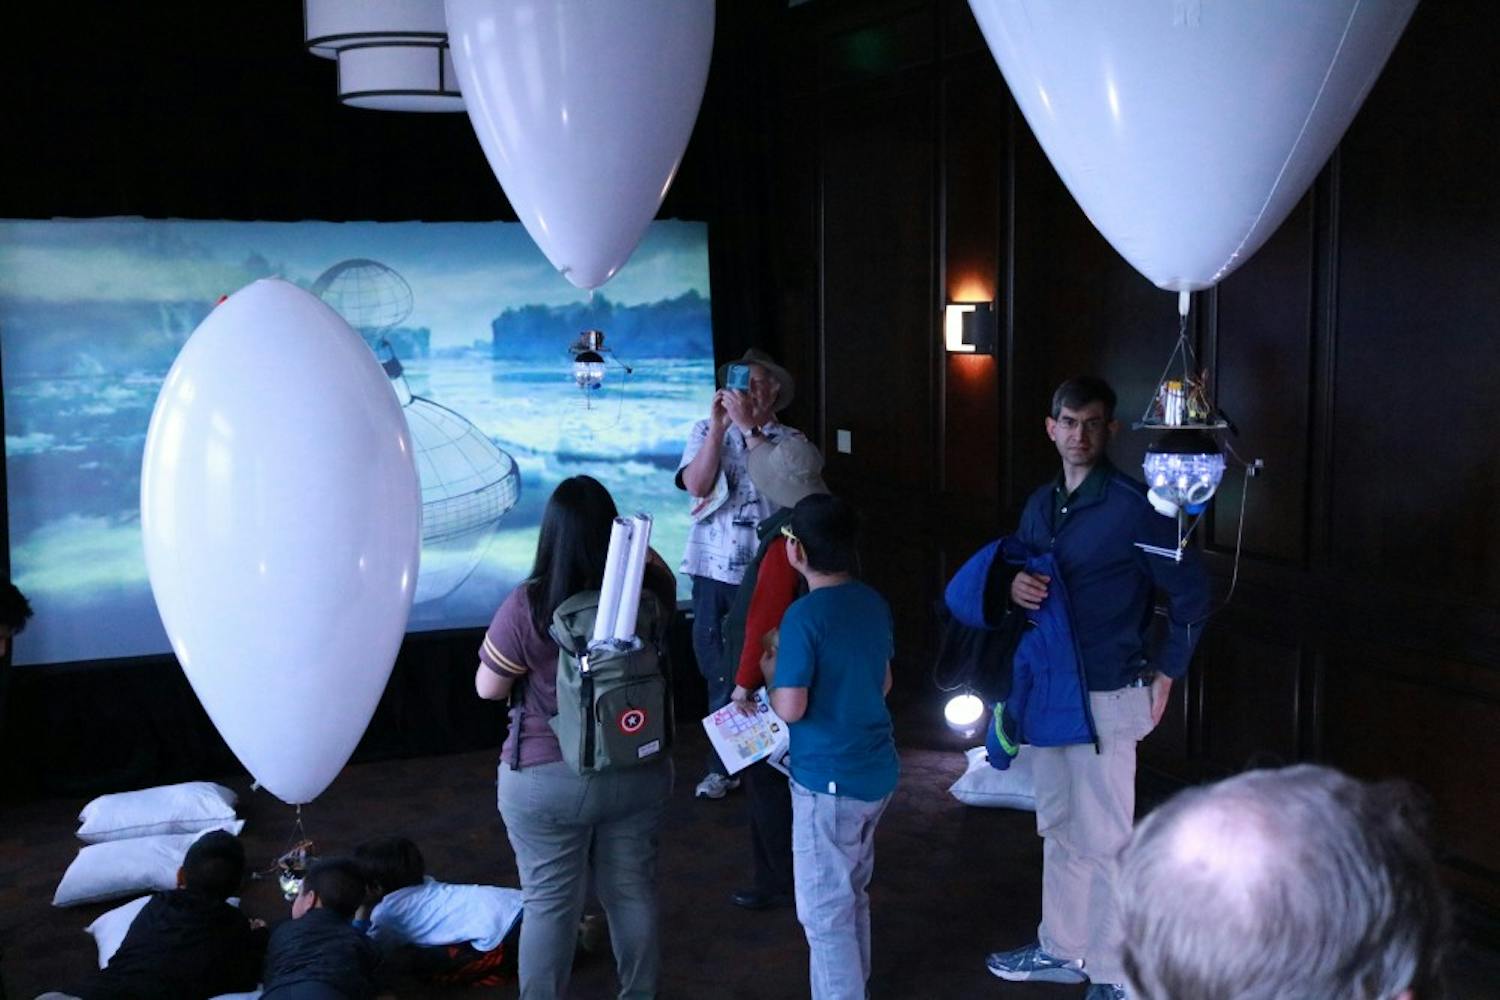 Fly Blimps! a series of autonomous helium filled blimps whose movements are controlled by house flies was exhibited at Emerge, Festival of Futures: Frankenstein during the Night of Open Door at ASU's Tempe, Arizona campus on Saturday, Feb. 25, 2017.